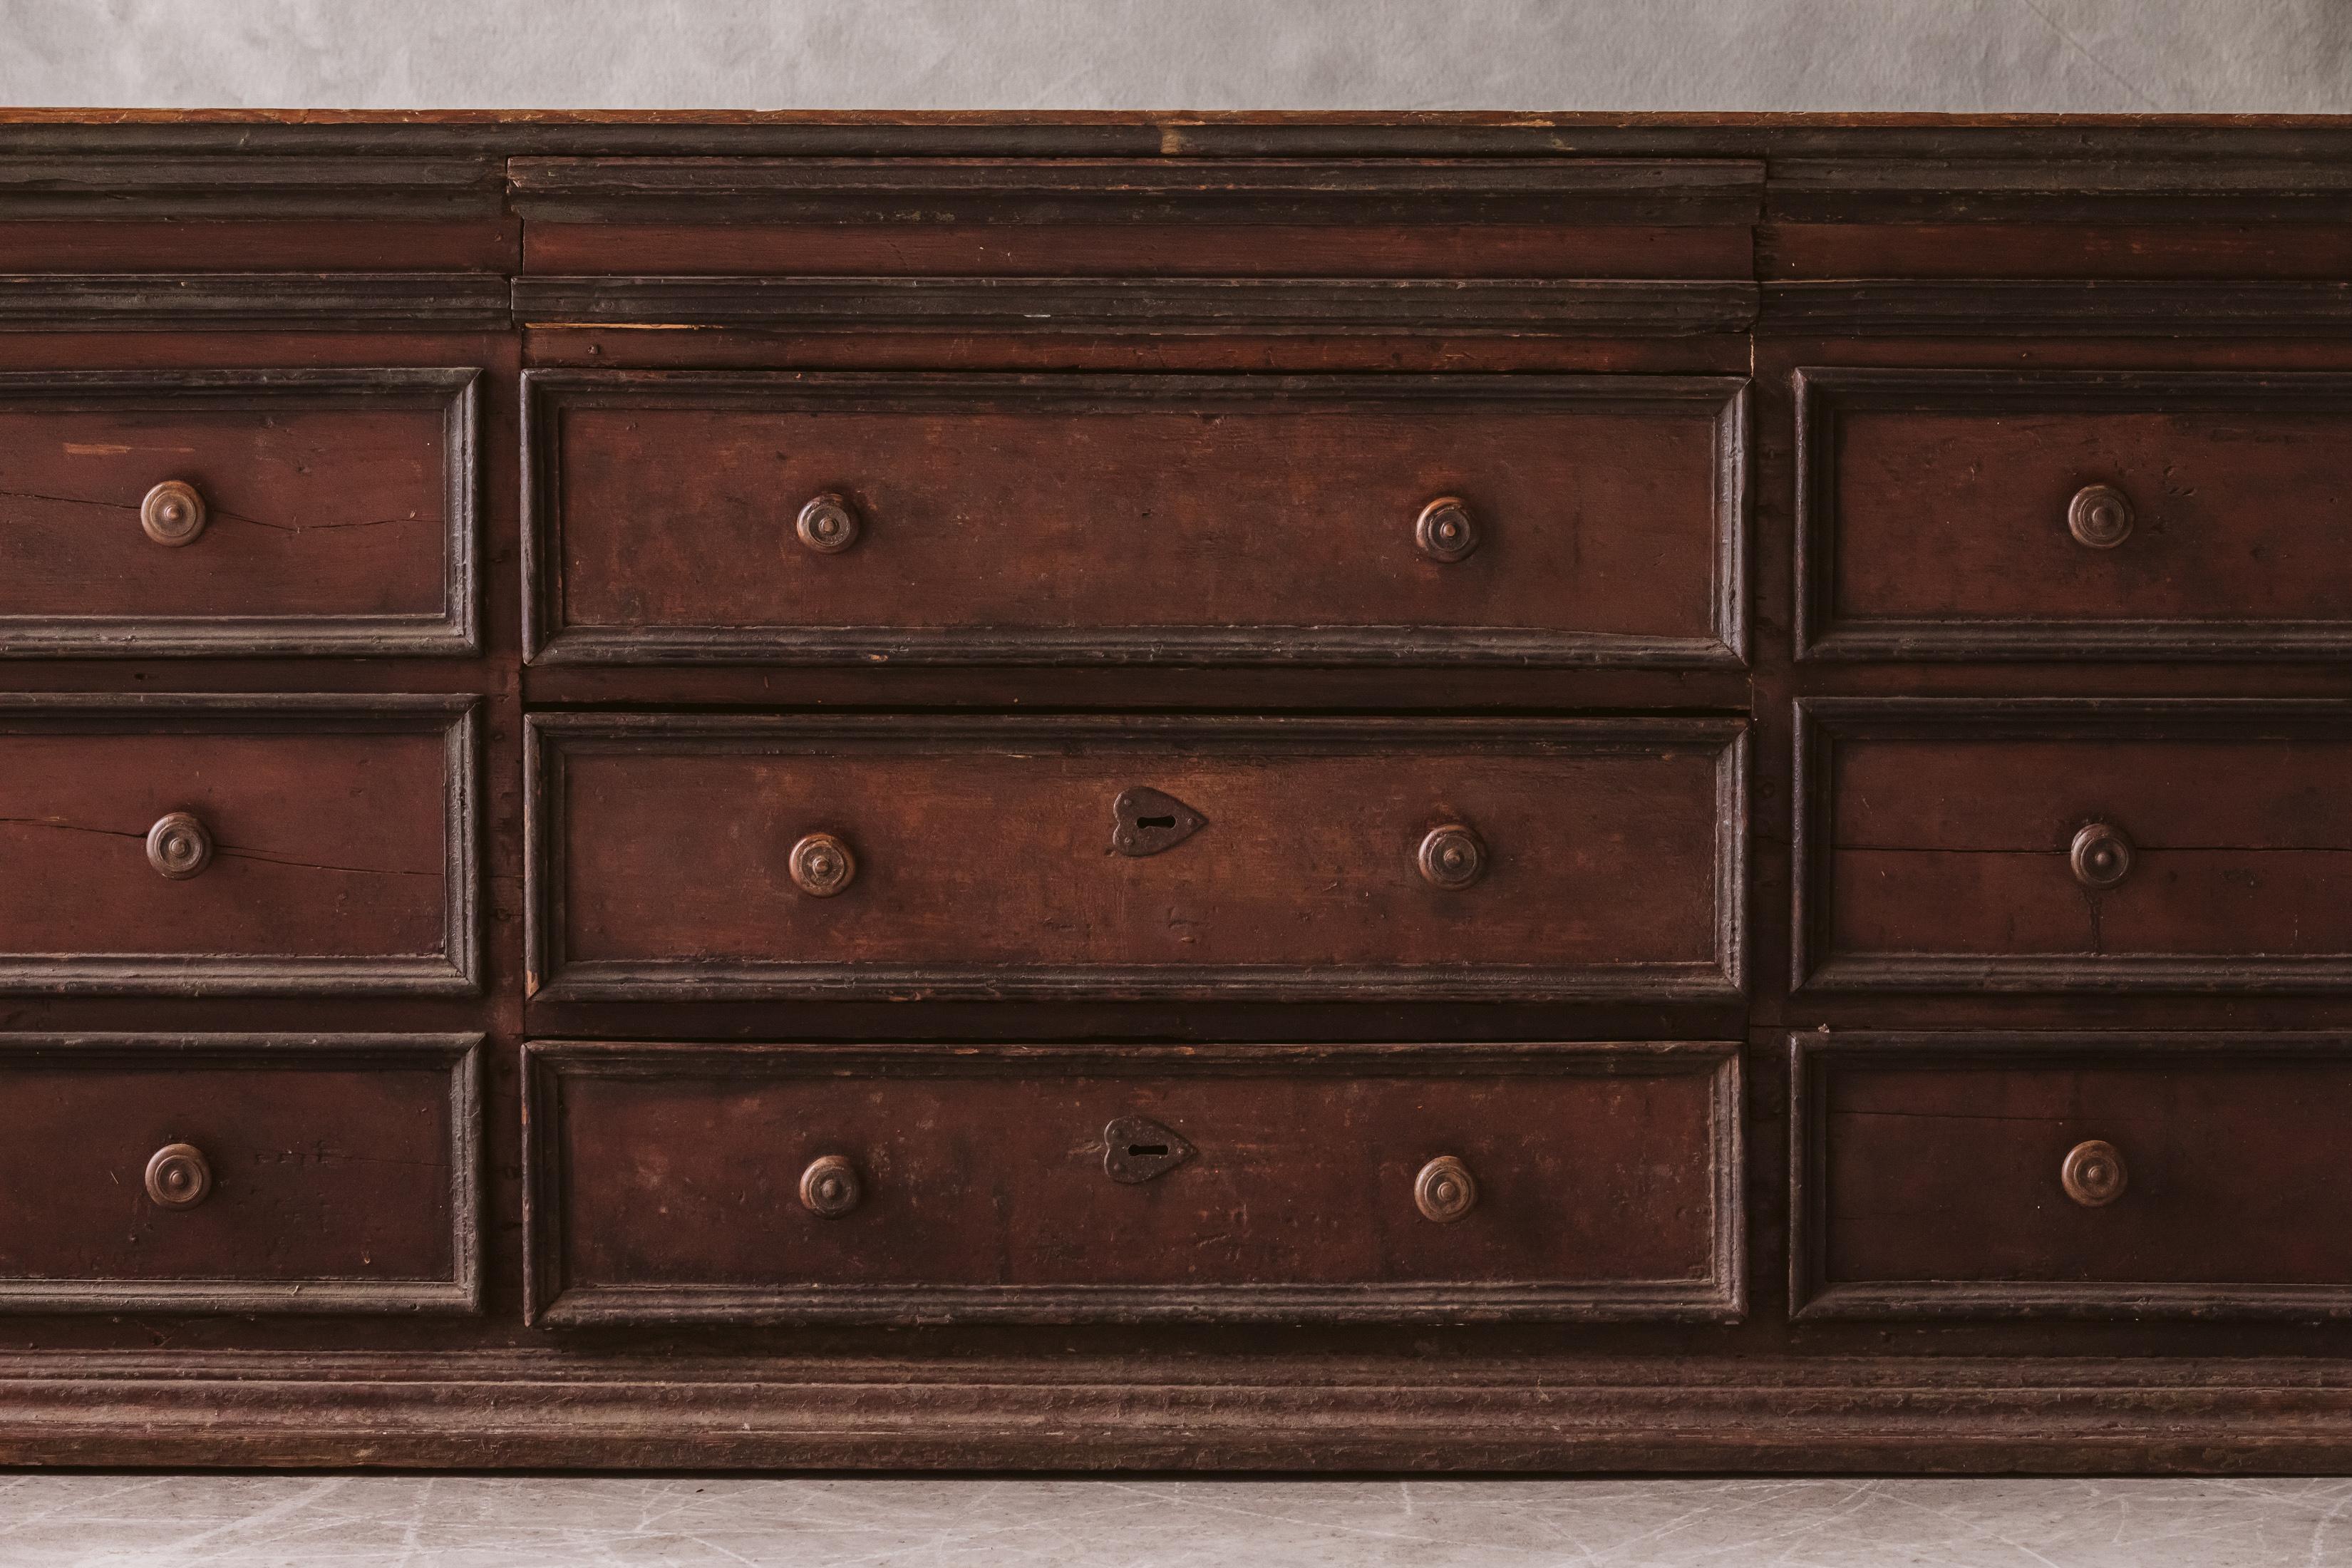 European Early Apothecary Chest from Italy, Circa 1800